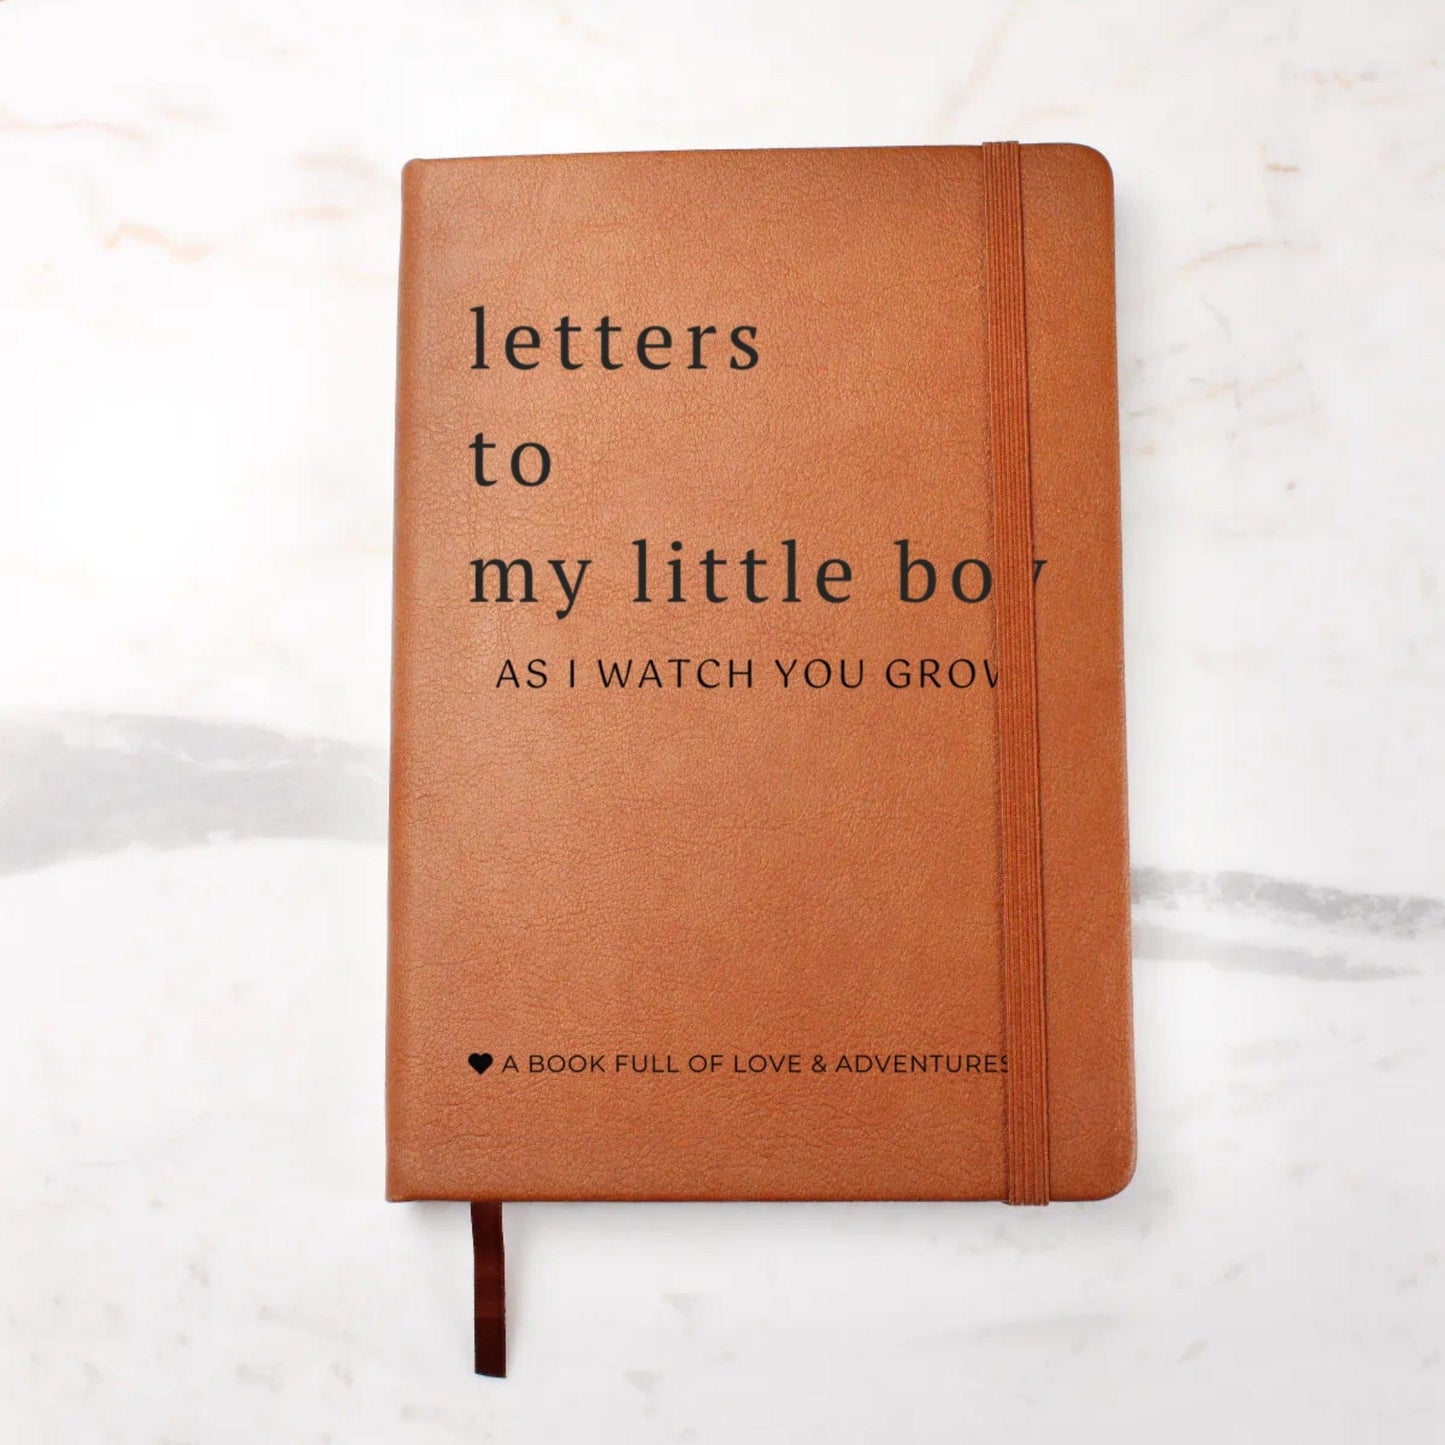 Letters To My Little Boy As I Watch You Grow - Personalized Journal, Baby or Memory Book